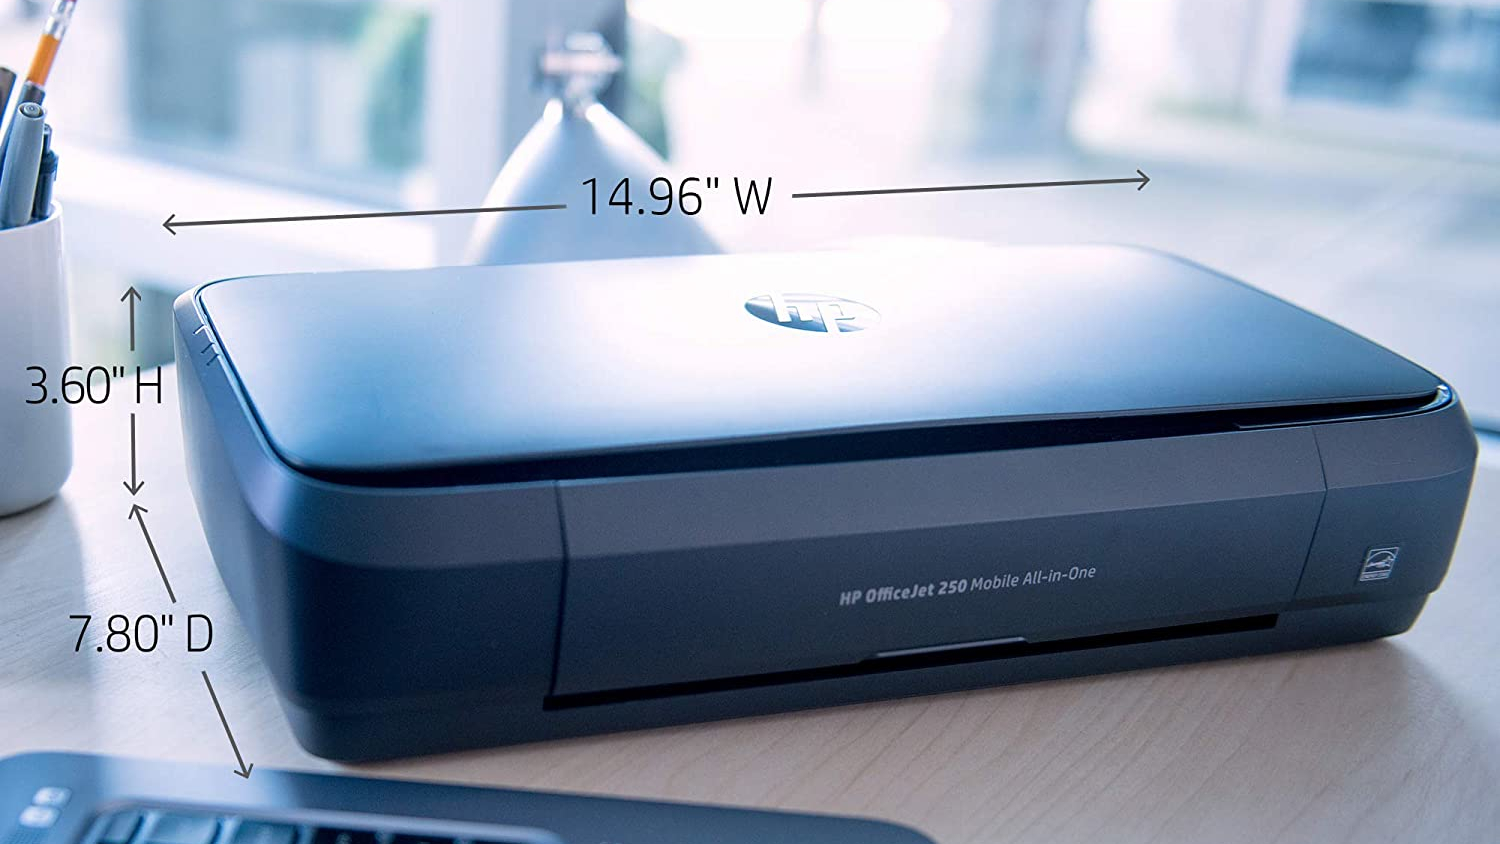 HP OfficeJet All-in-One 250 compact printer